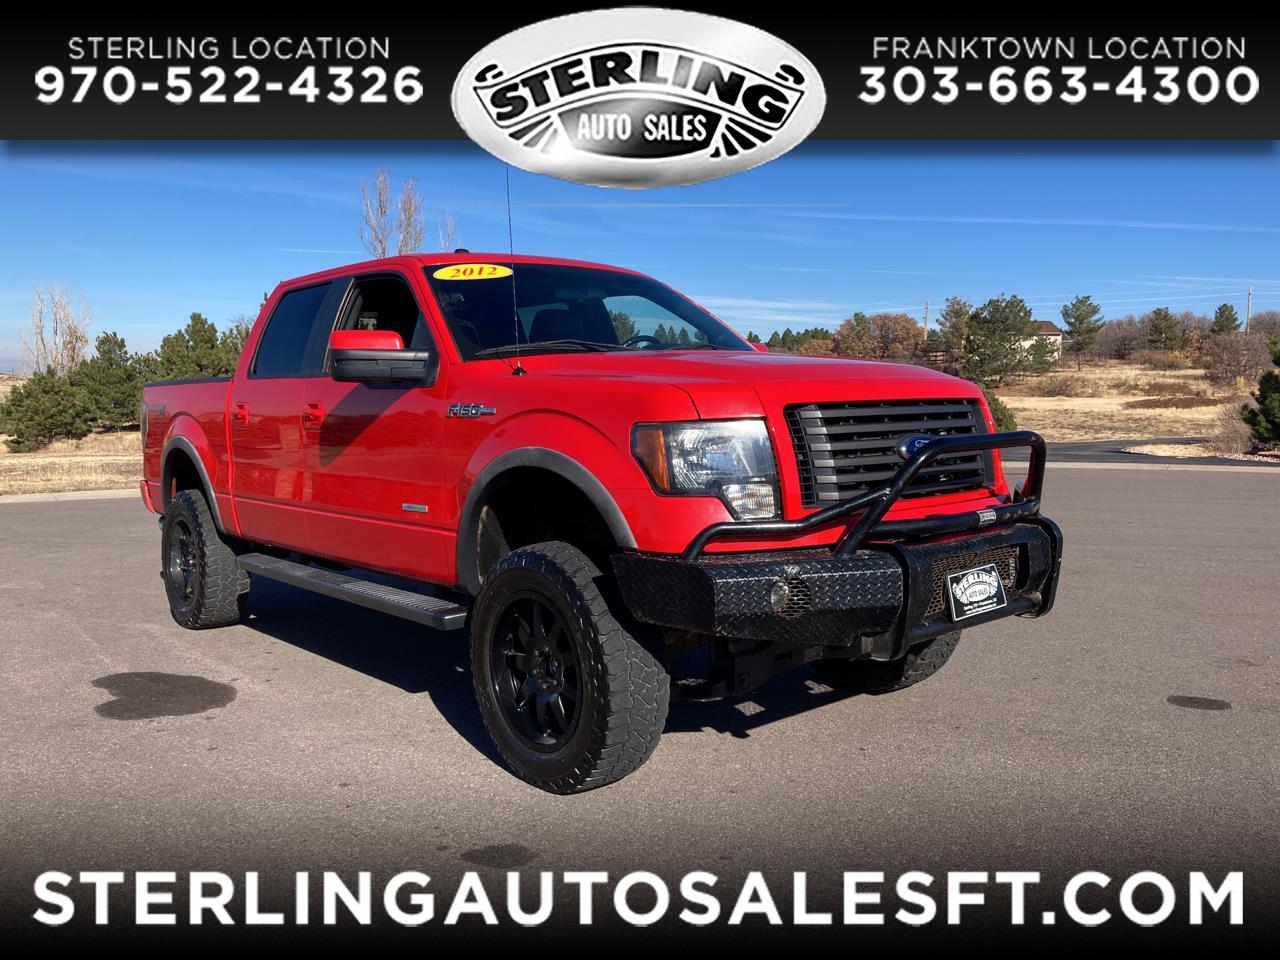 Ford F-150 4WD SuperCrew 145" FX4 2012